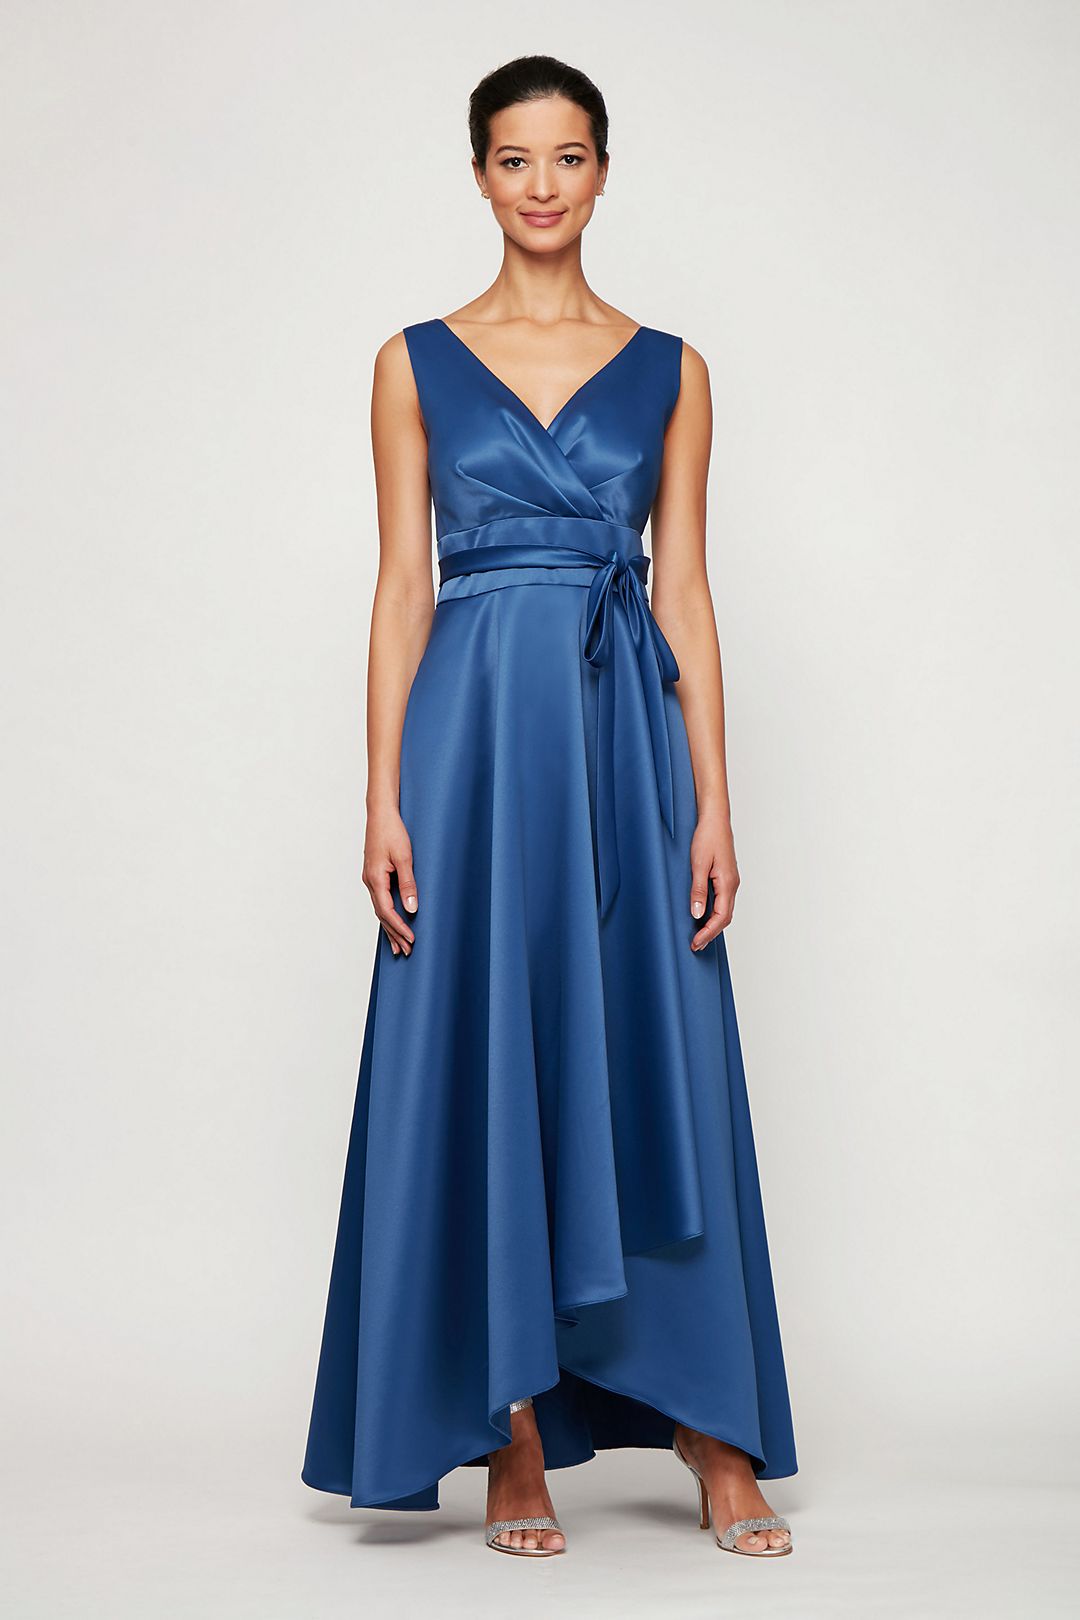 Surplice Satin Ball Gown with High-Low Tulip Hem Image 1